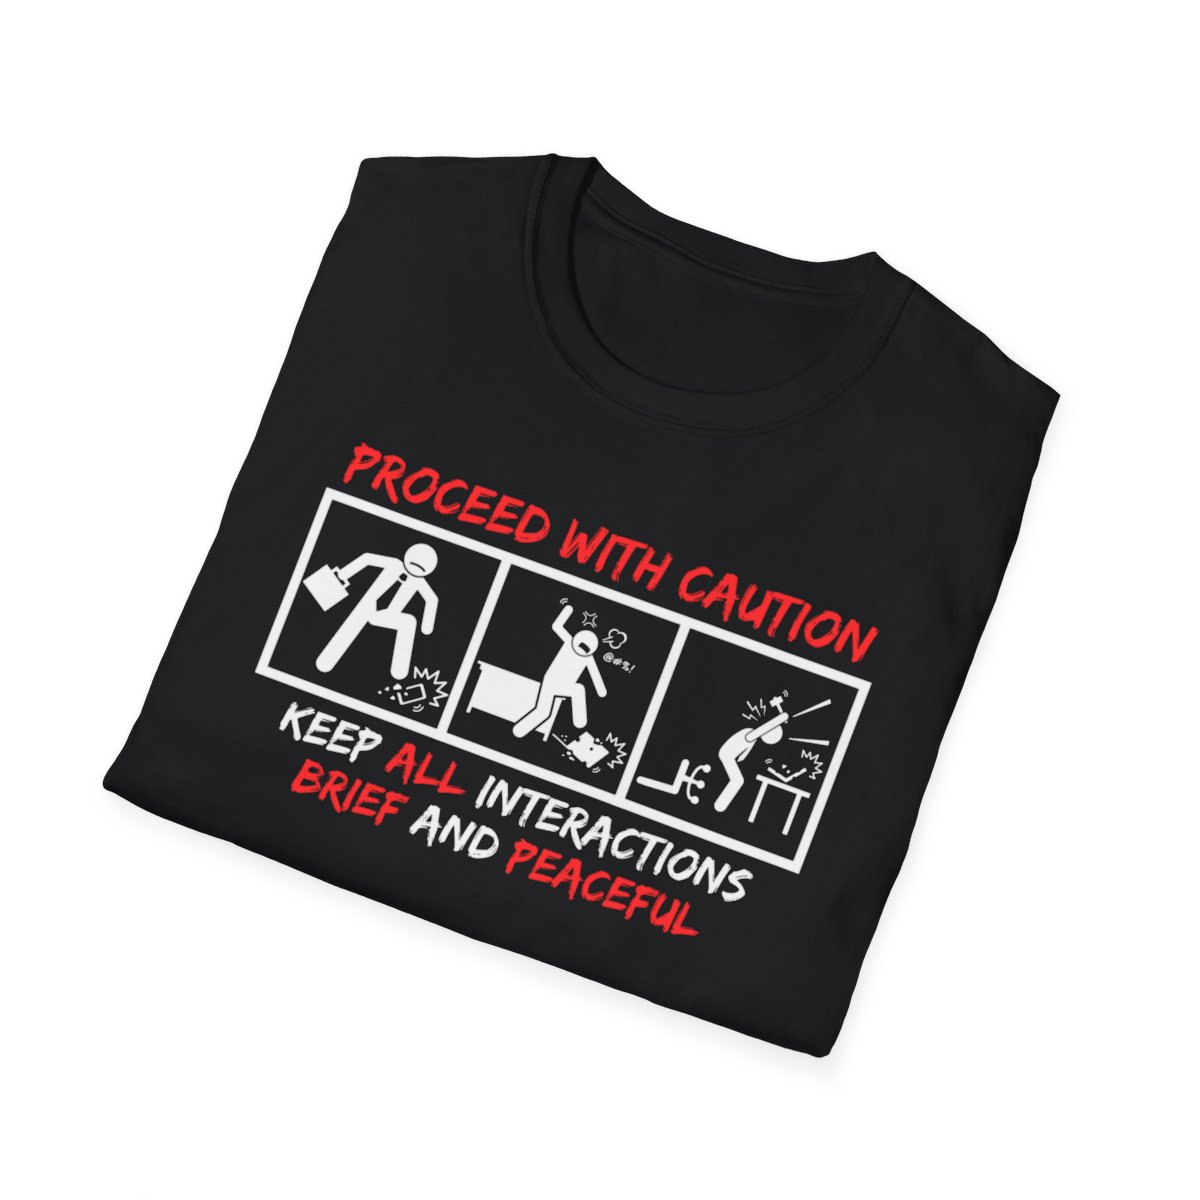 Proceed With Caution: Keep All Interactions Brief and Peaceful - Unisex Softstyle T-Shirt product thumbnail image